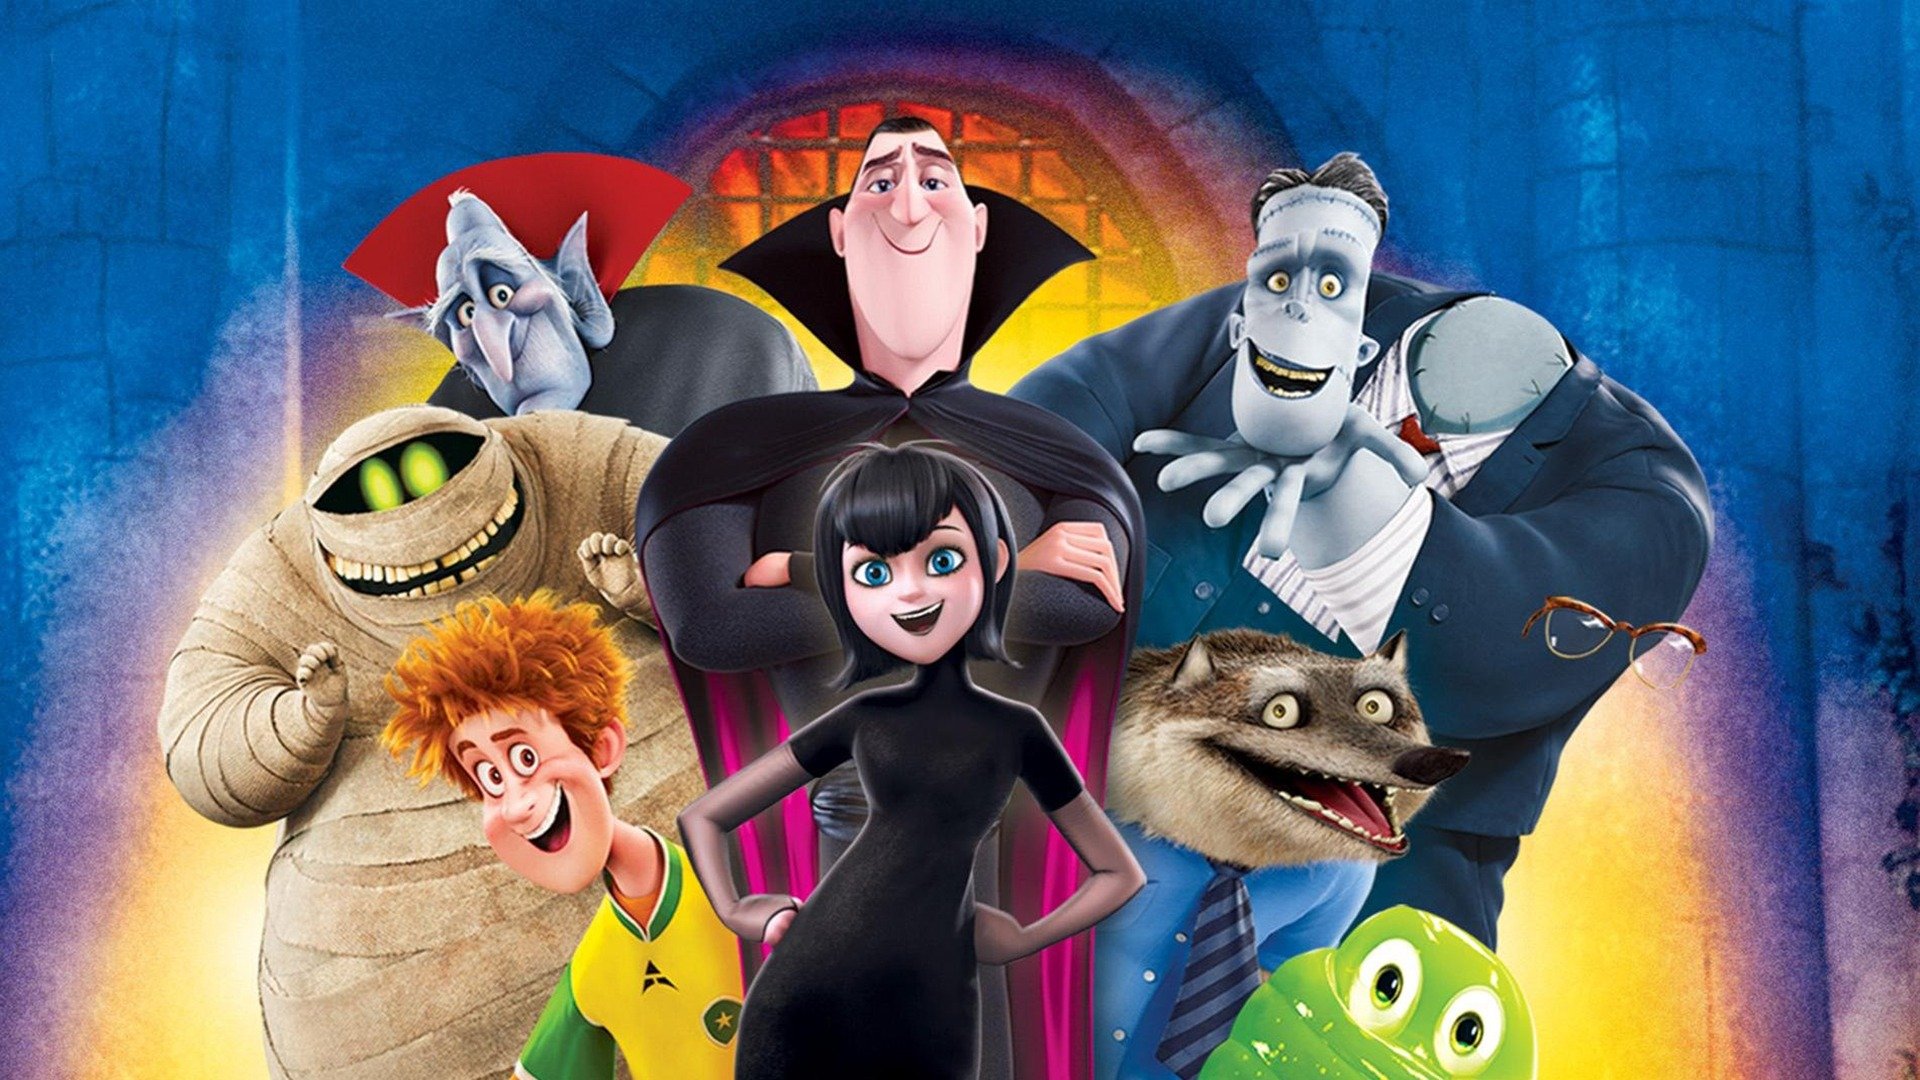 Watch Hotel Transylvania 2 Online with NEON from $4.99.